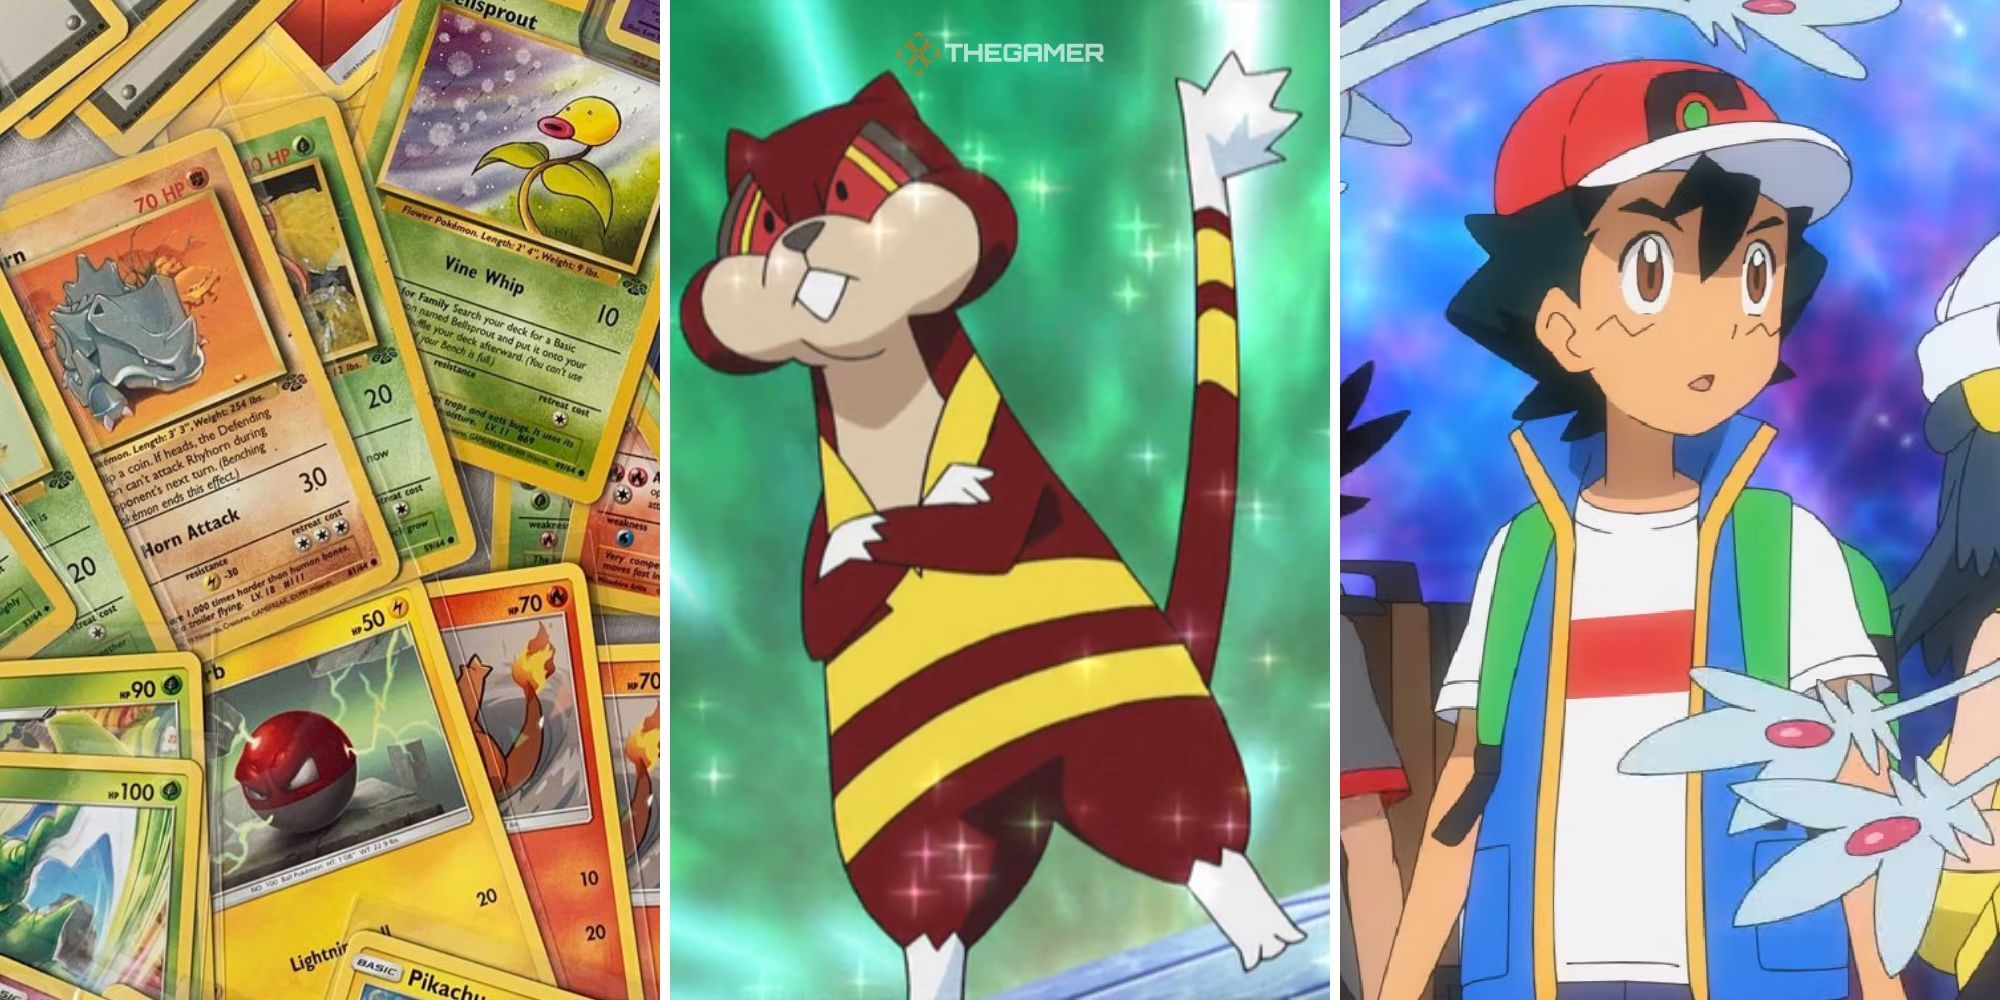 This Week In Pokemon: Stolen Cards, The Least Popular 'Mon, And More